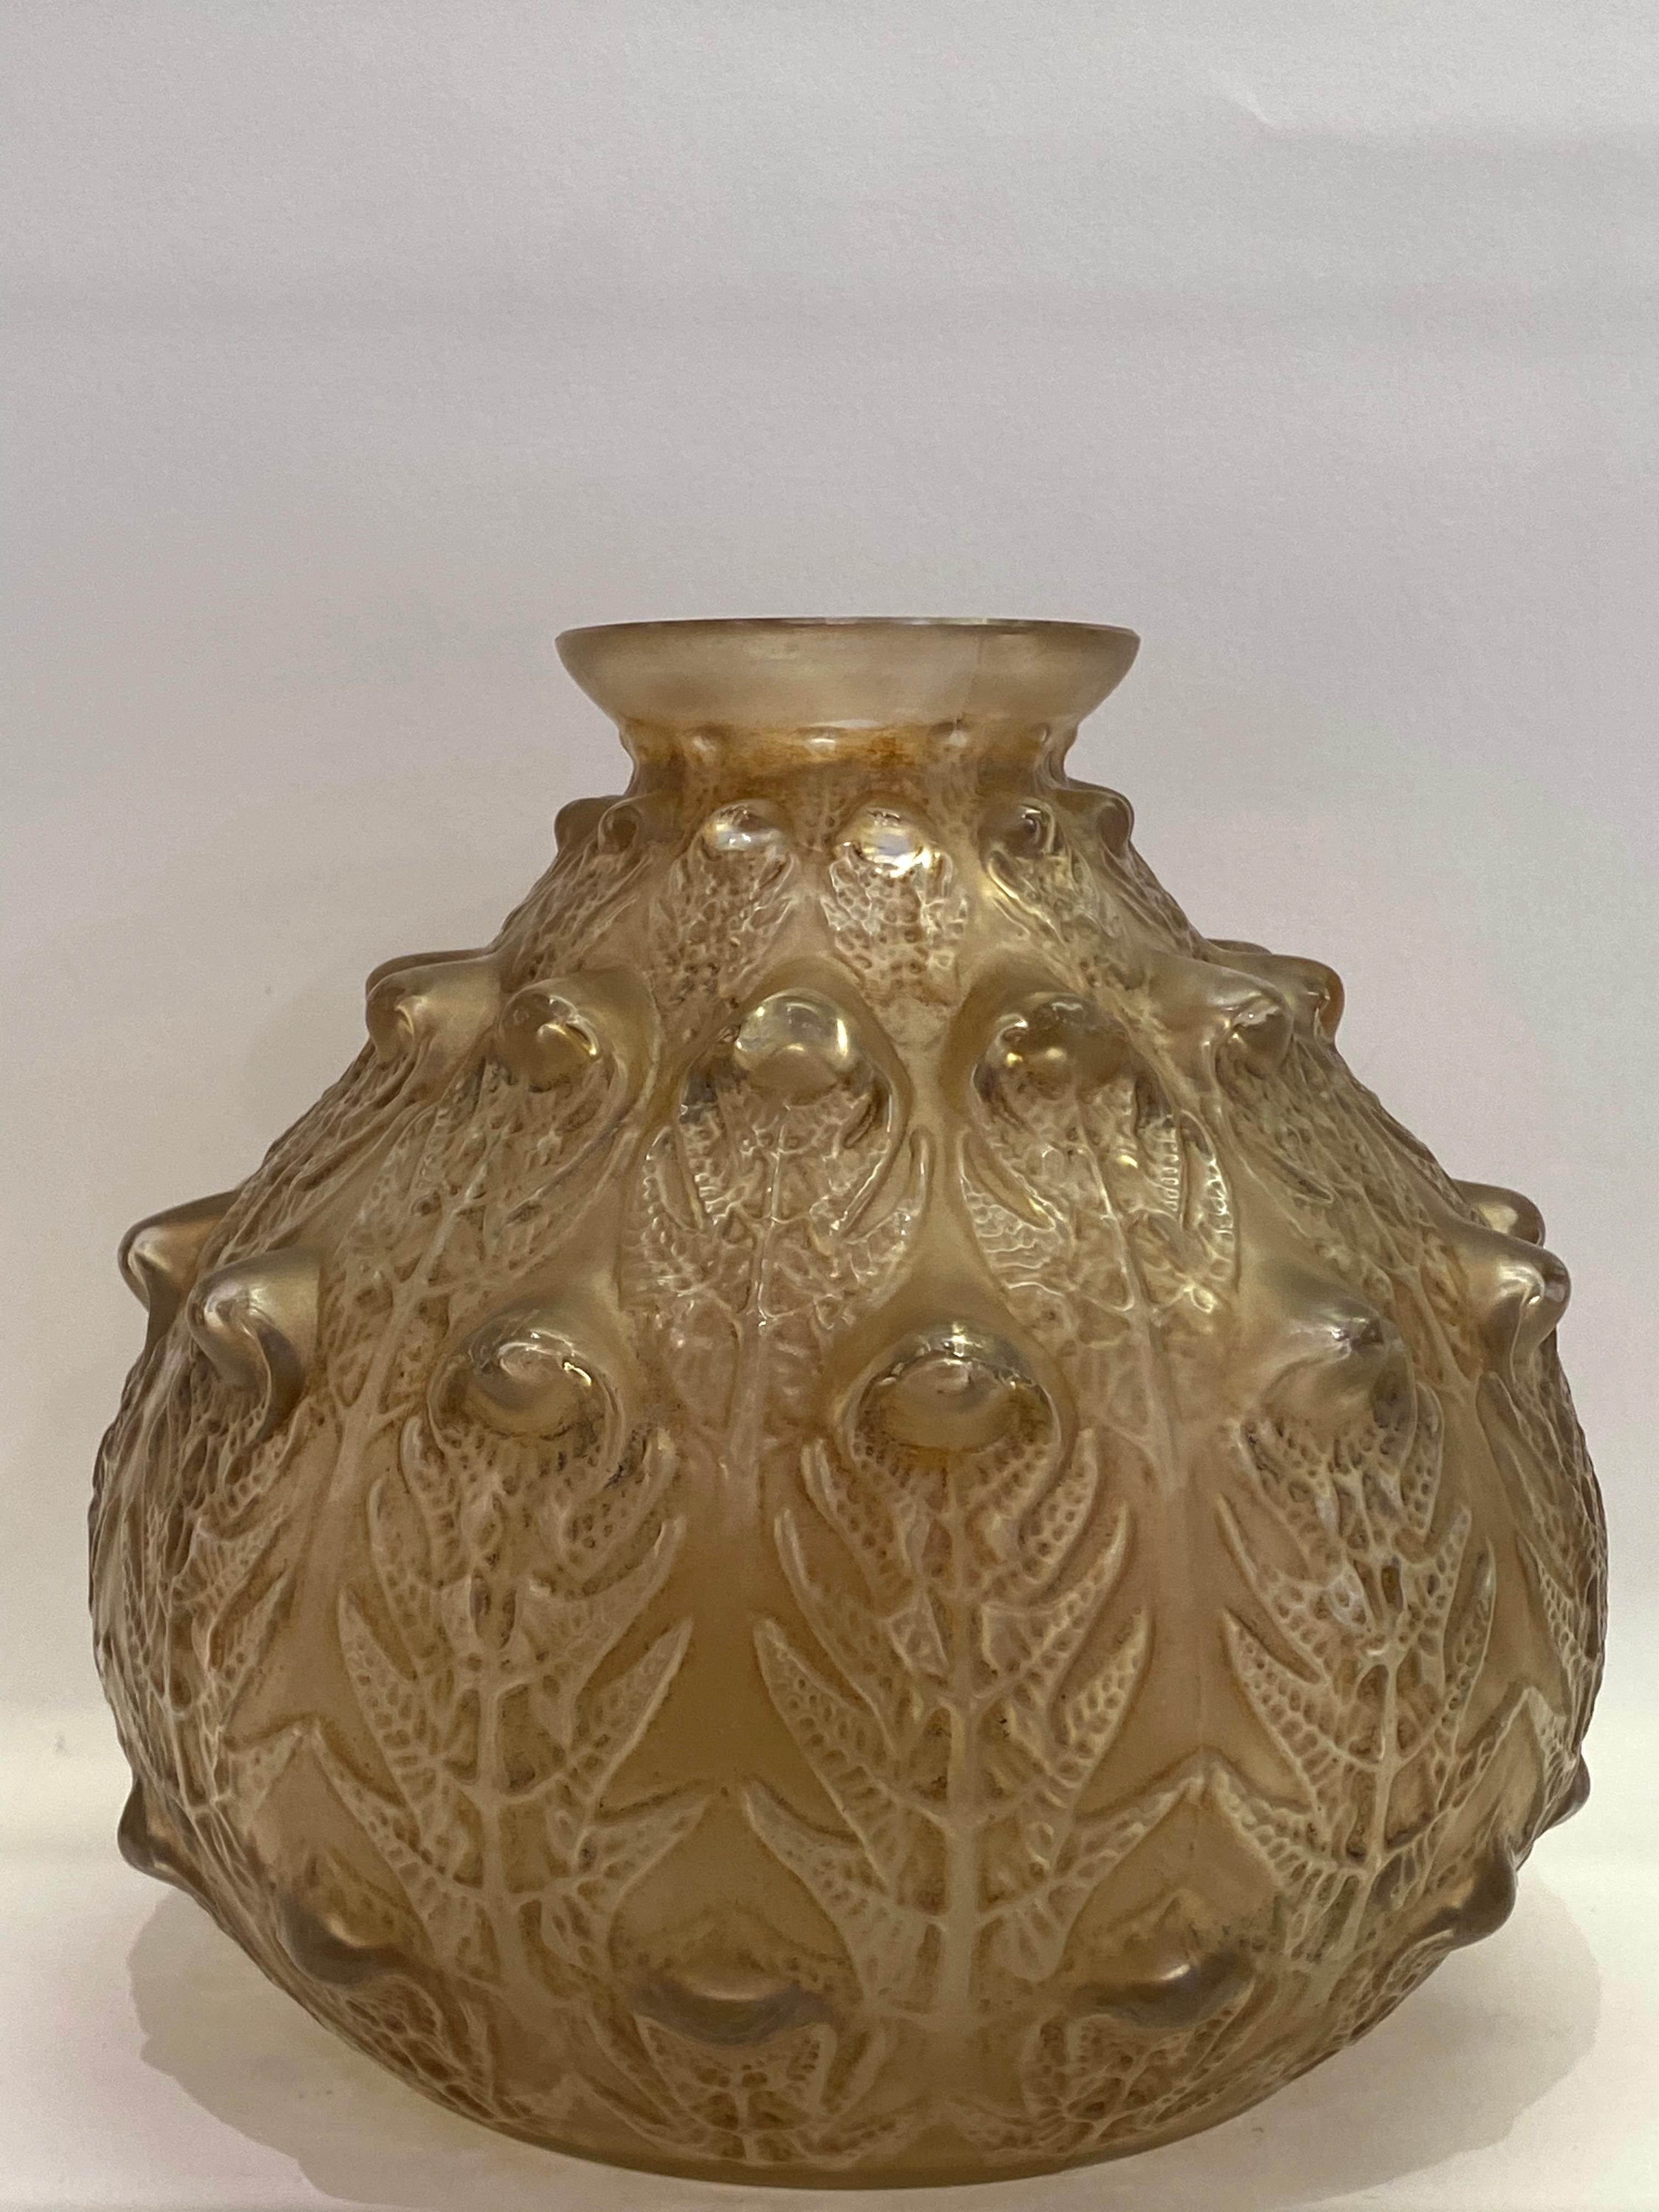 Molded 1912 René Lalique Fougeres Vase in Frosted Glass with Sepia Patina, Ferns